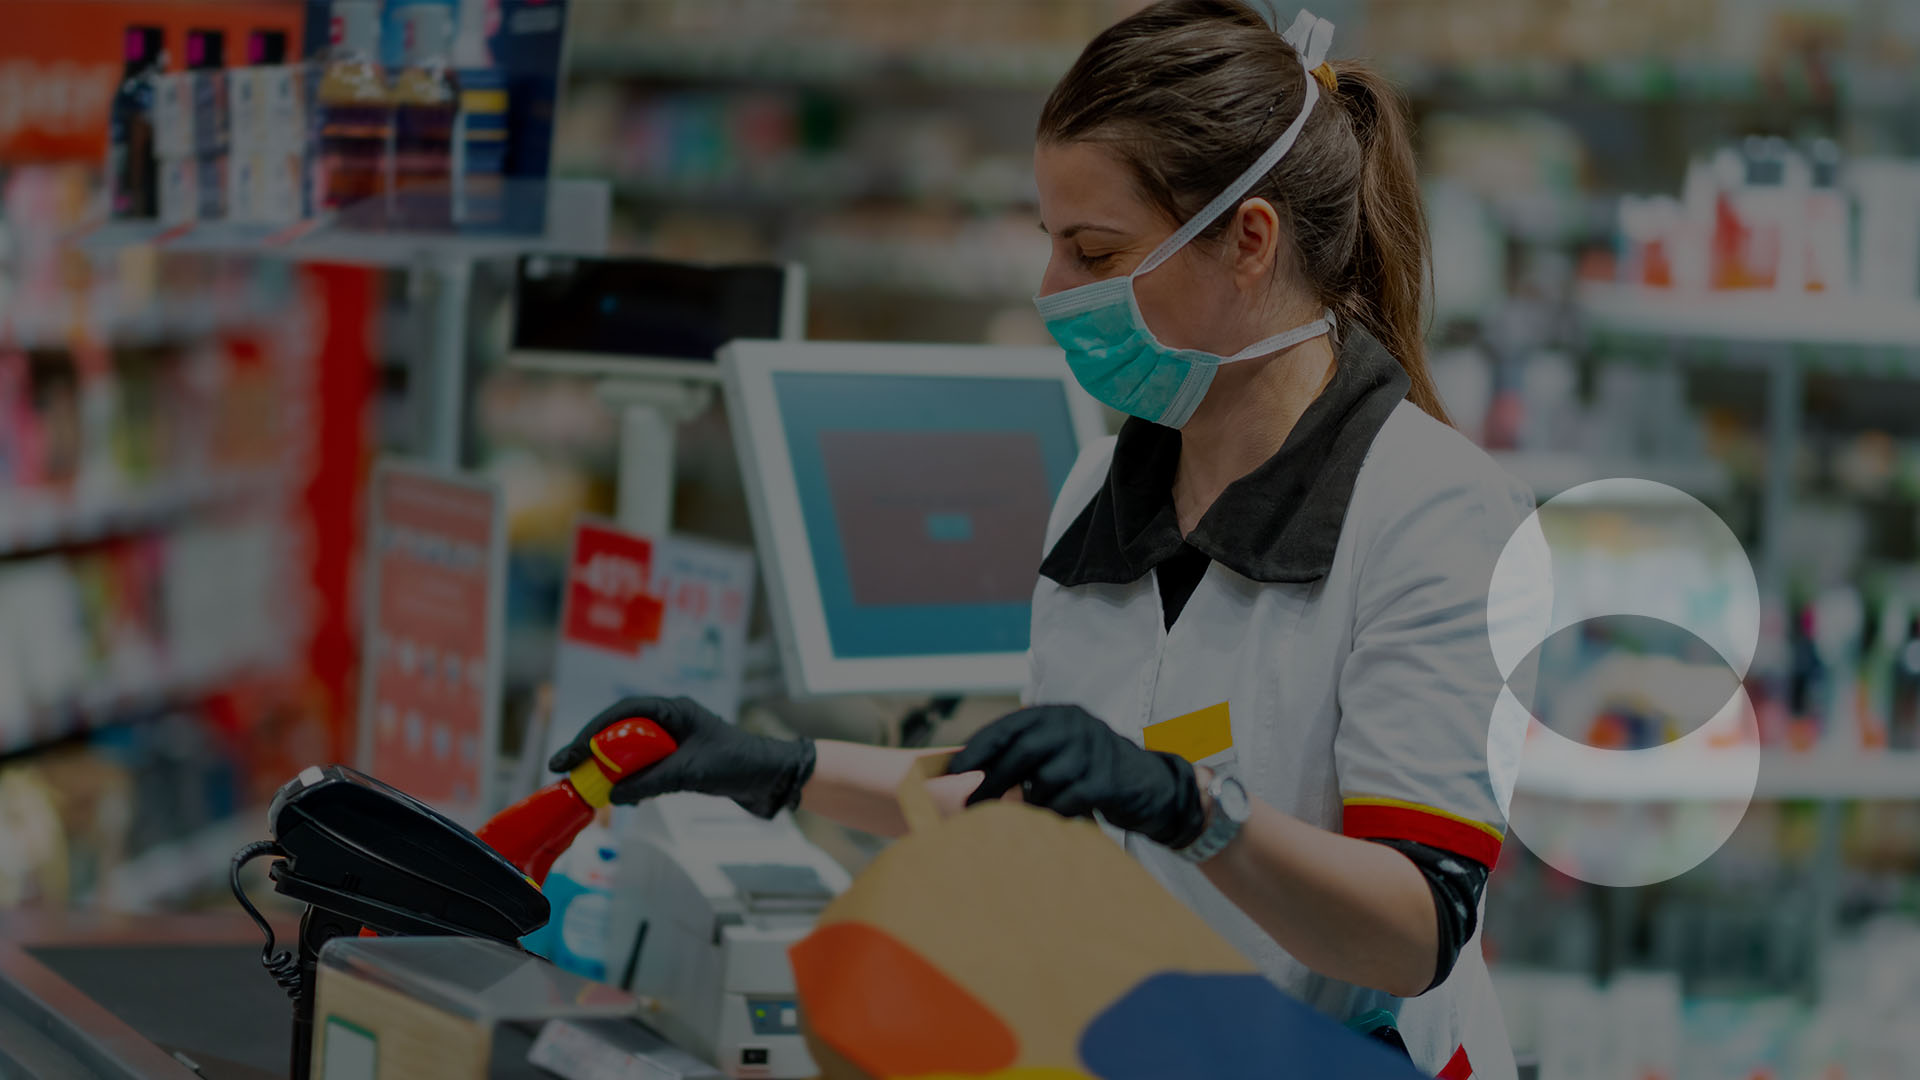 Cashier wearing a medical mask and gloves checking out a customer at the grocery store